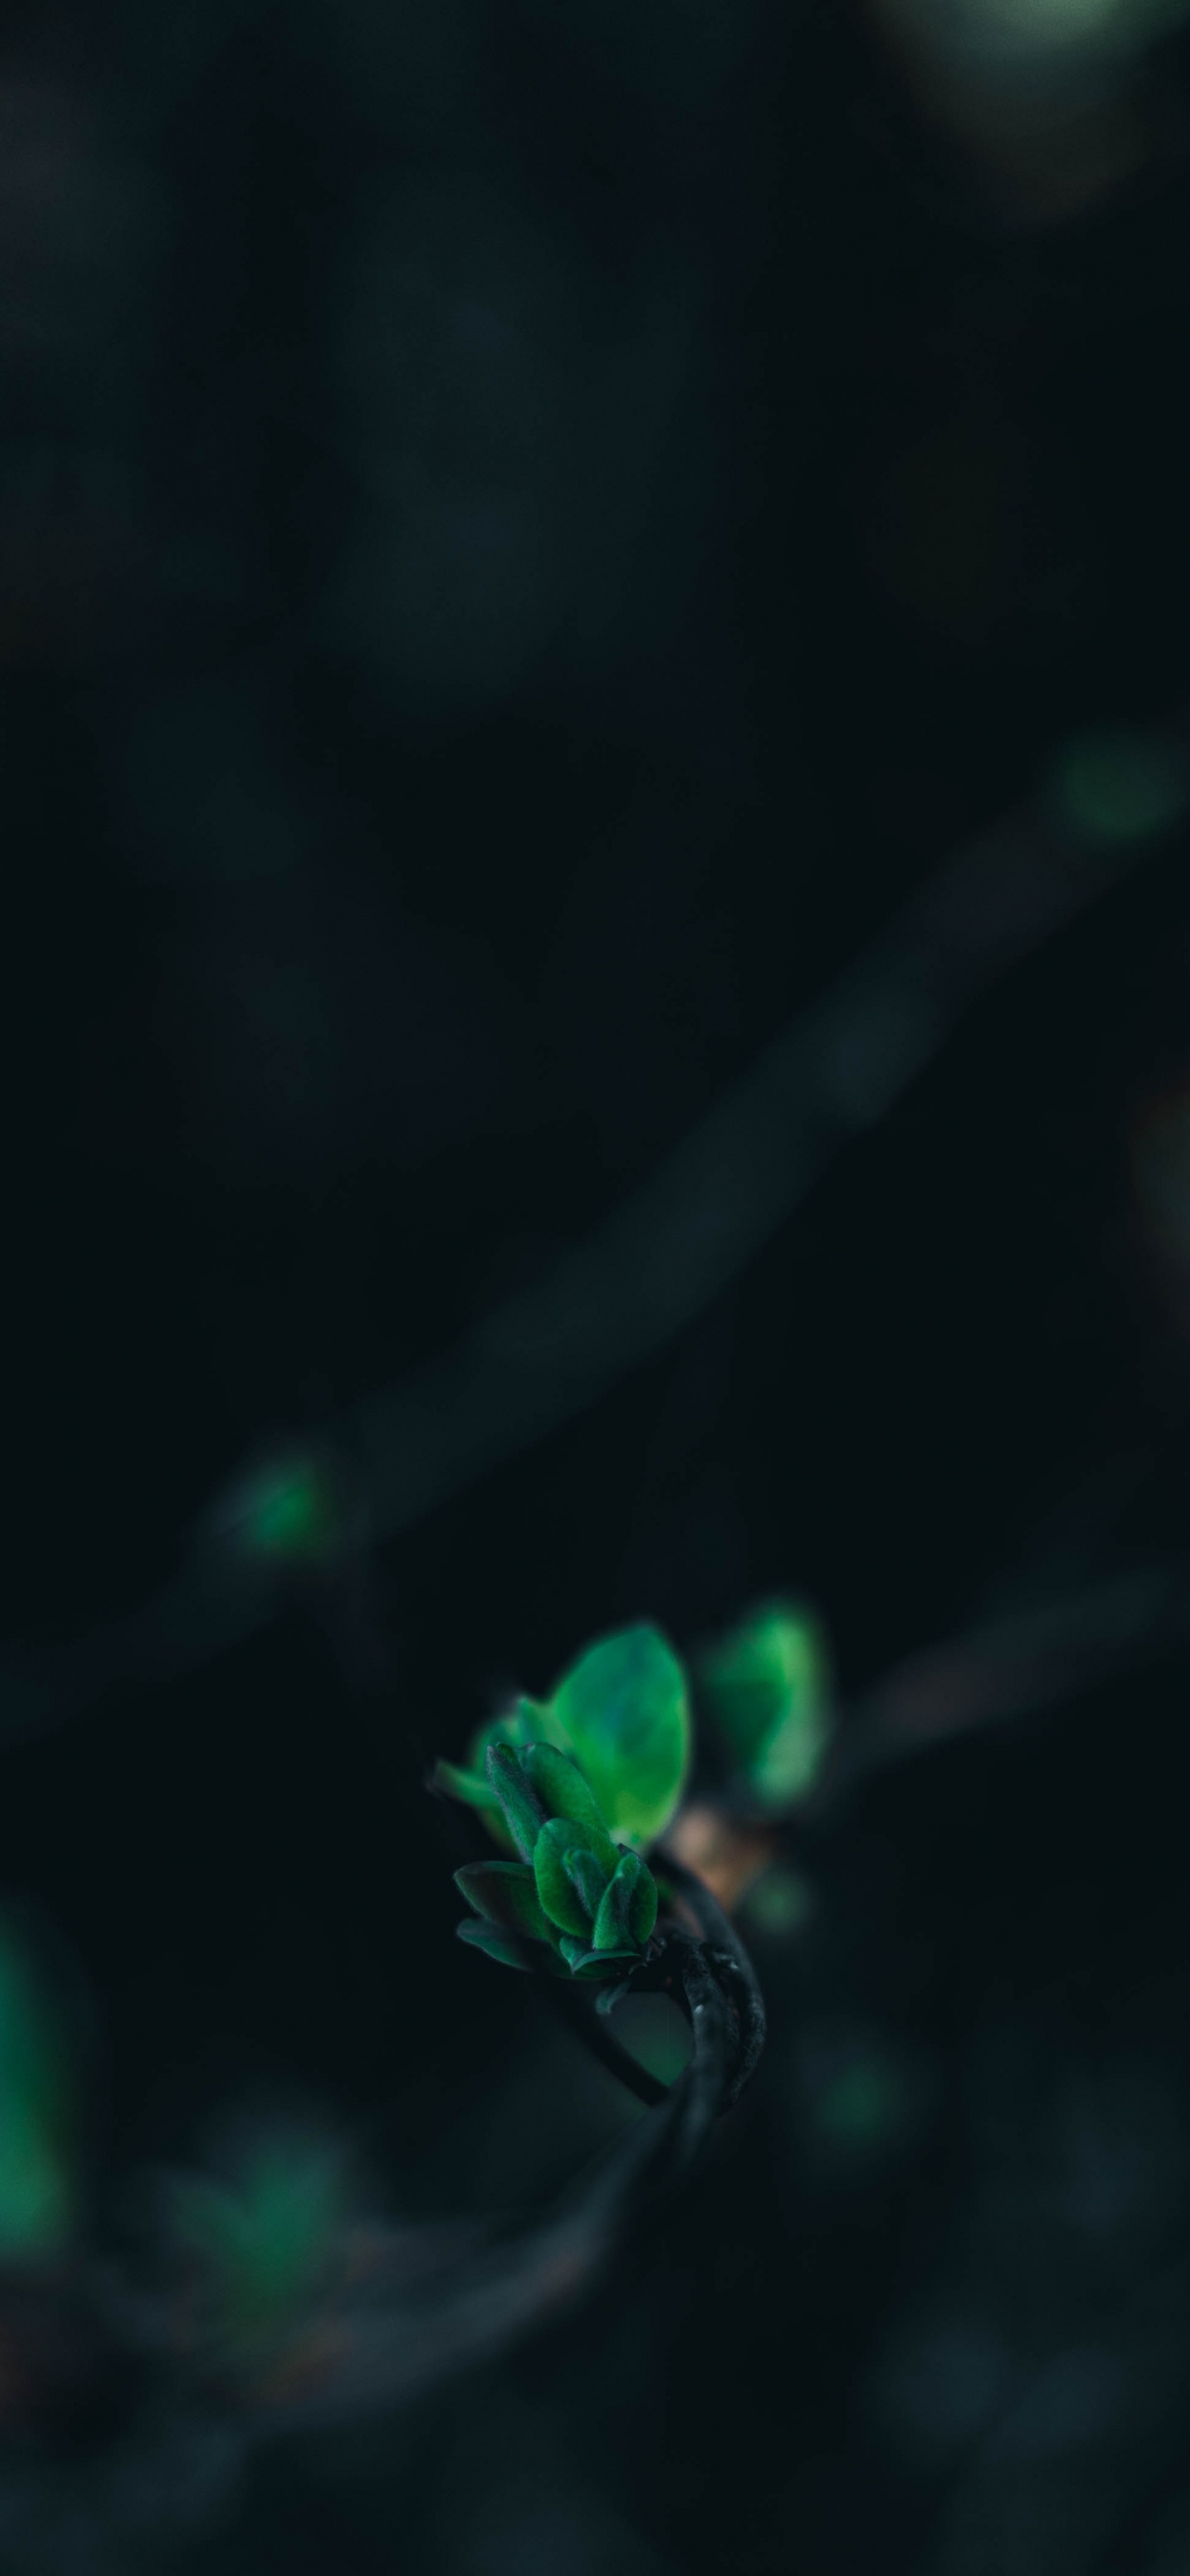 Green, Black, Water, Turquoise, Light. Wallpaper in 1242x2688 Resolution